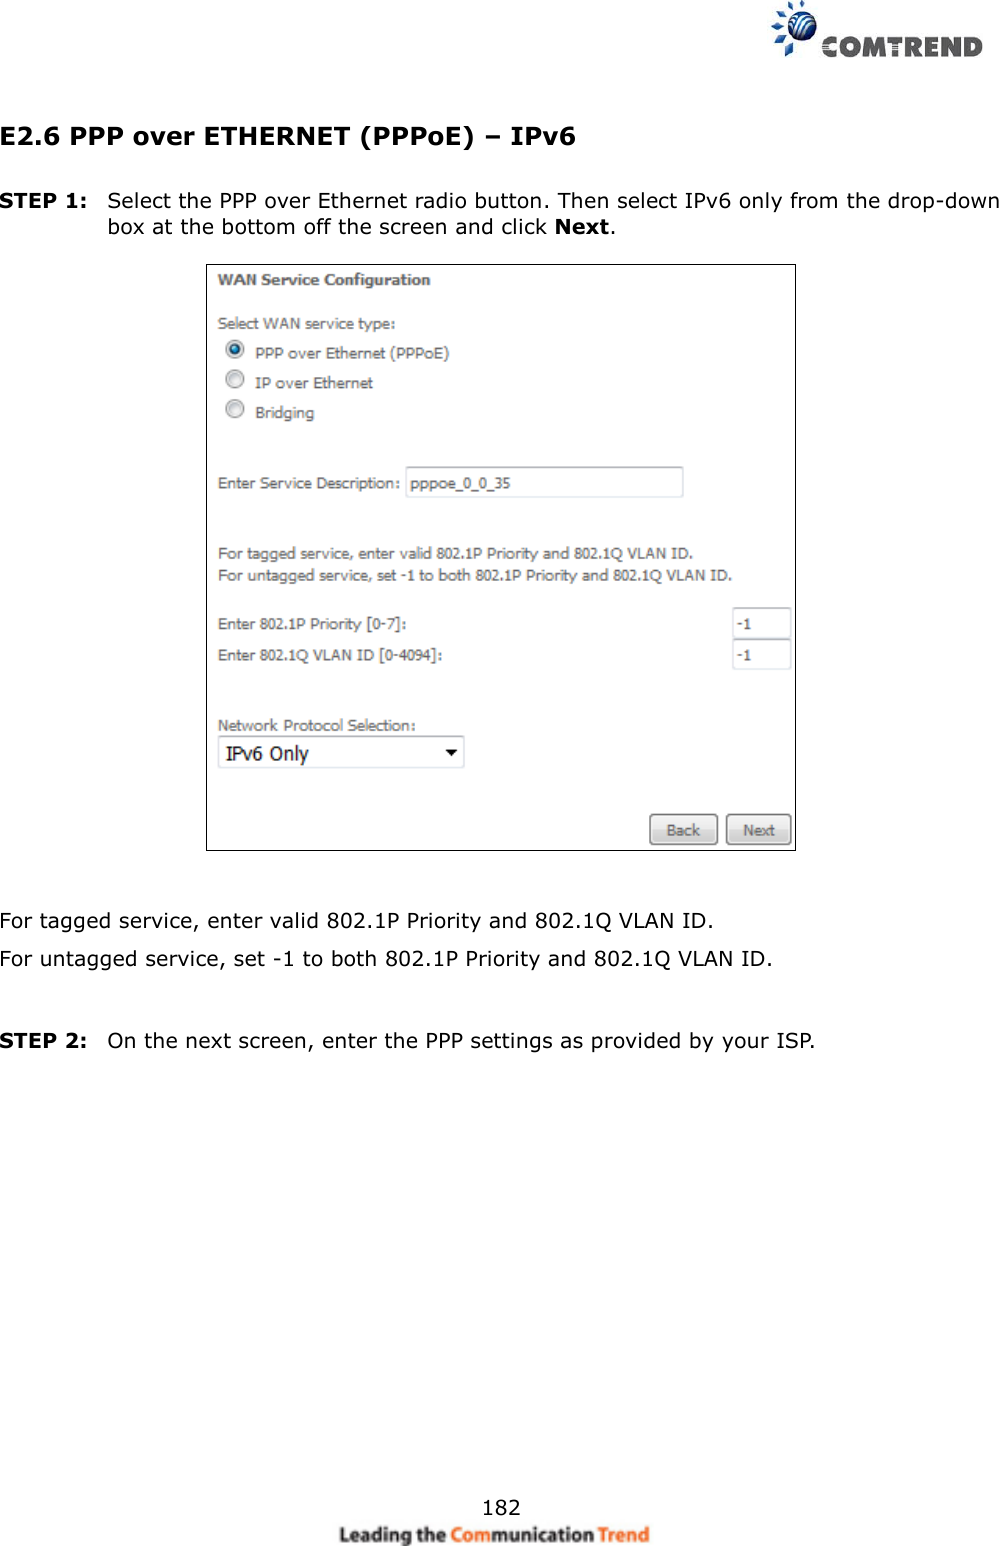     182 E2.6 PPP over ETHERNET (PPPoE) – IPv6 STEP 1:  Select the PPP over Ethernet radio button. Then select IPv6 only from the drop-down box at the bottom off the screen and click Next.     For tagged service, enter valid 802.1P Priority and 802.1Q VLAN ID. For untagged service, set -1 to both 802.1P Priority and 802.1Q VLAN ID.   STEP 2:  On the next screen, enter the PPP settings as provided by your ISP.         